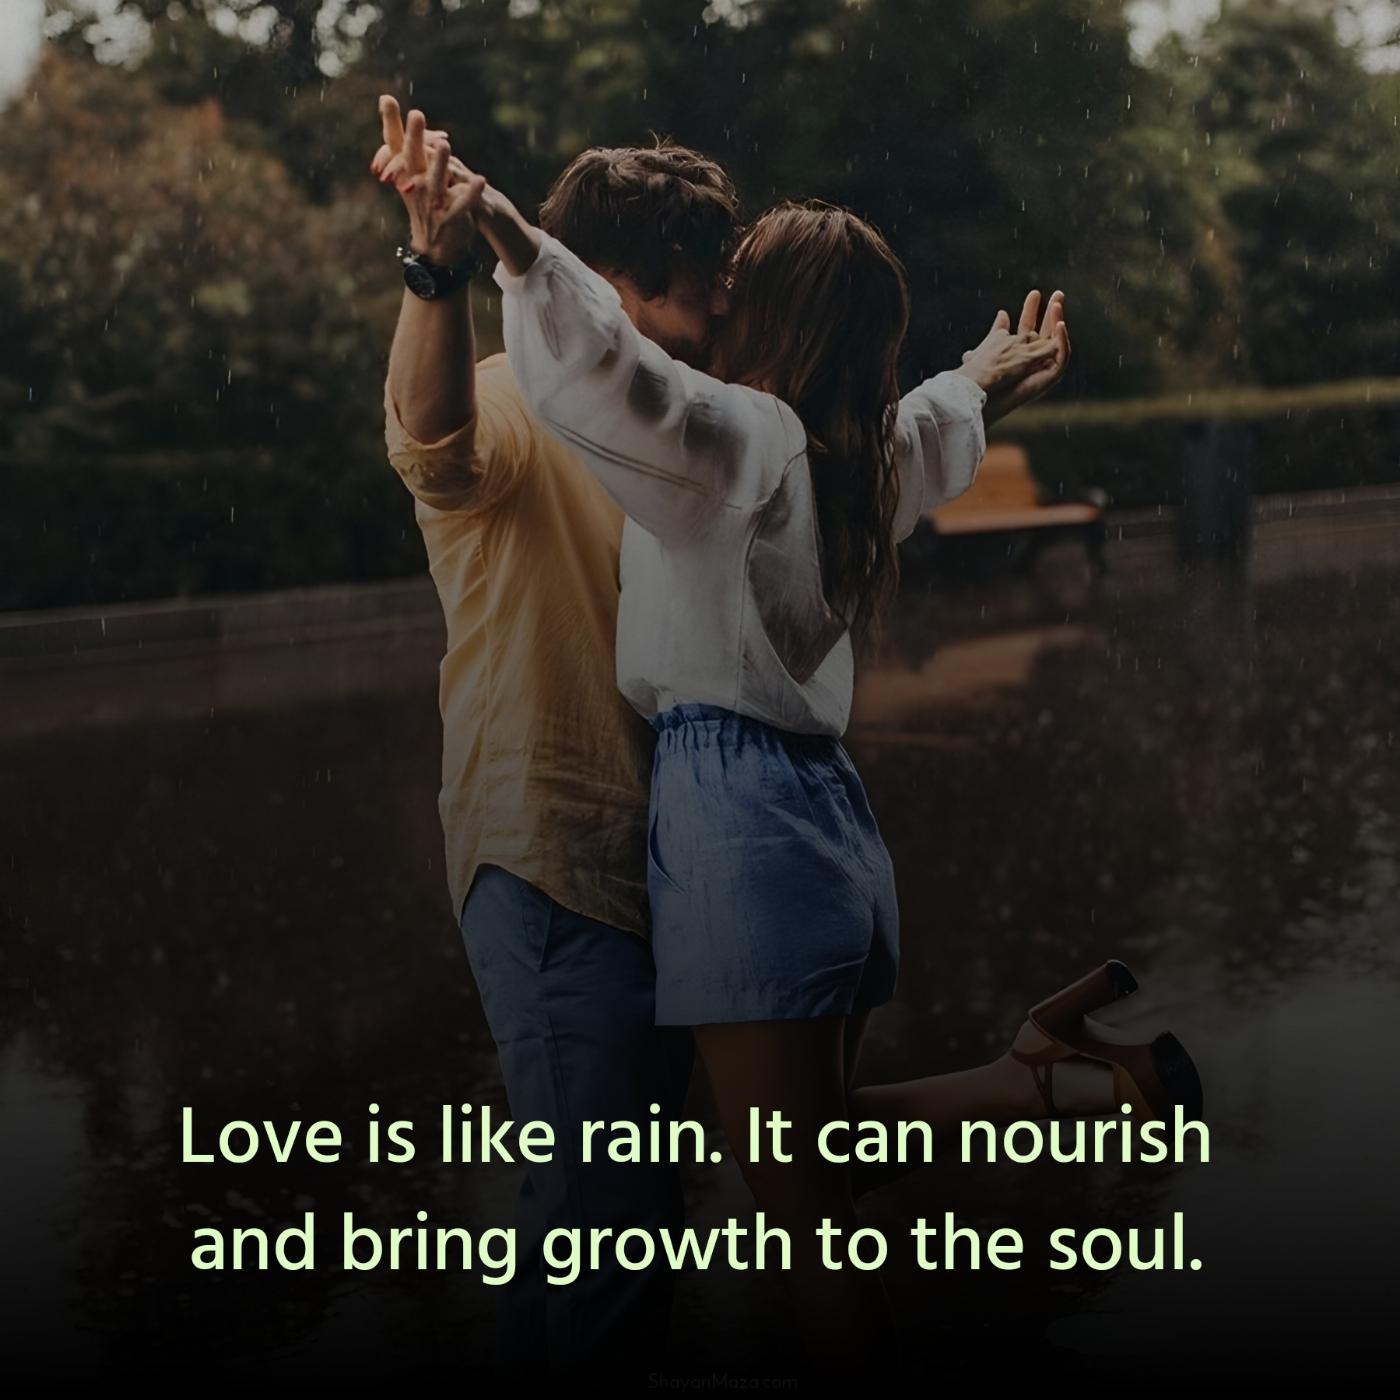 Love is like rain It can nourish and bring growth to the soul